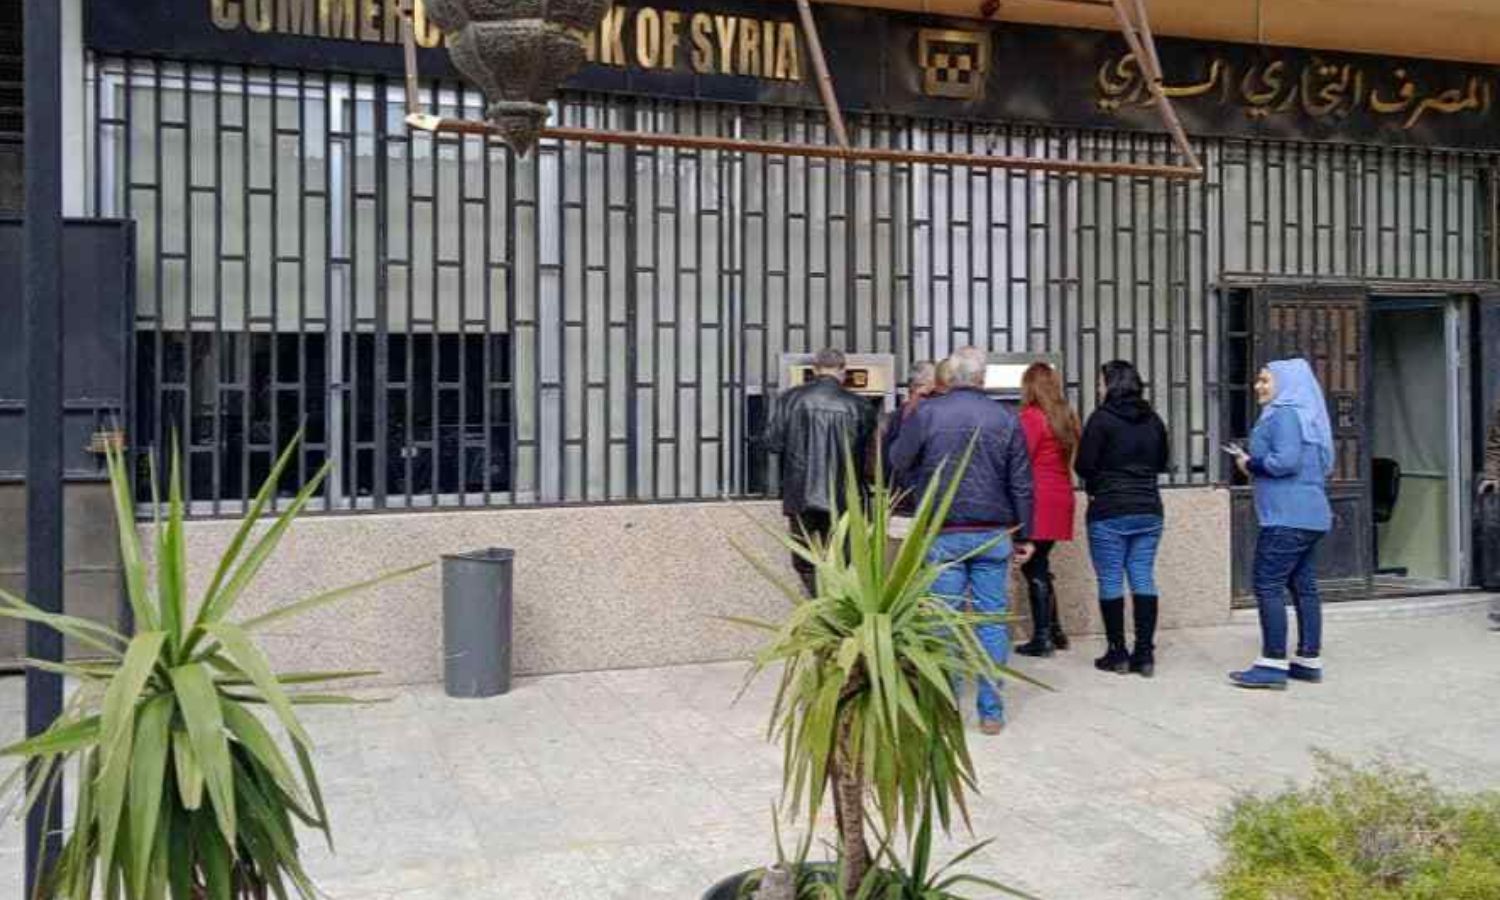 A Commercial Bank branch in Syria - April 8, 2022 (Commercial Bank of Syria)